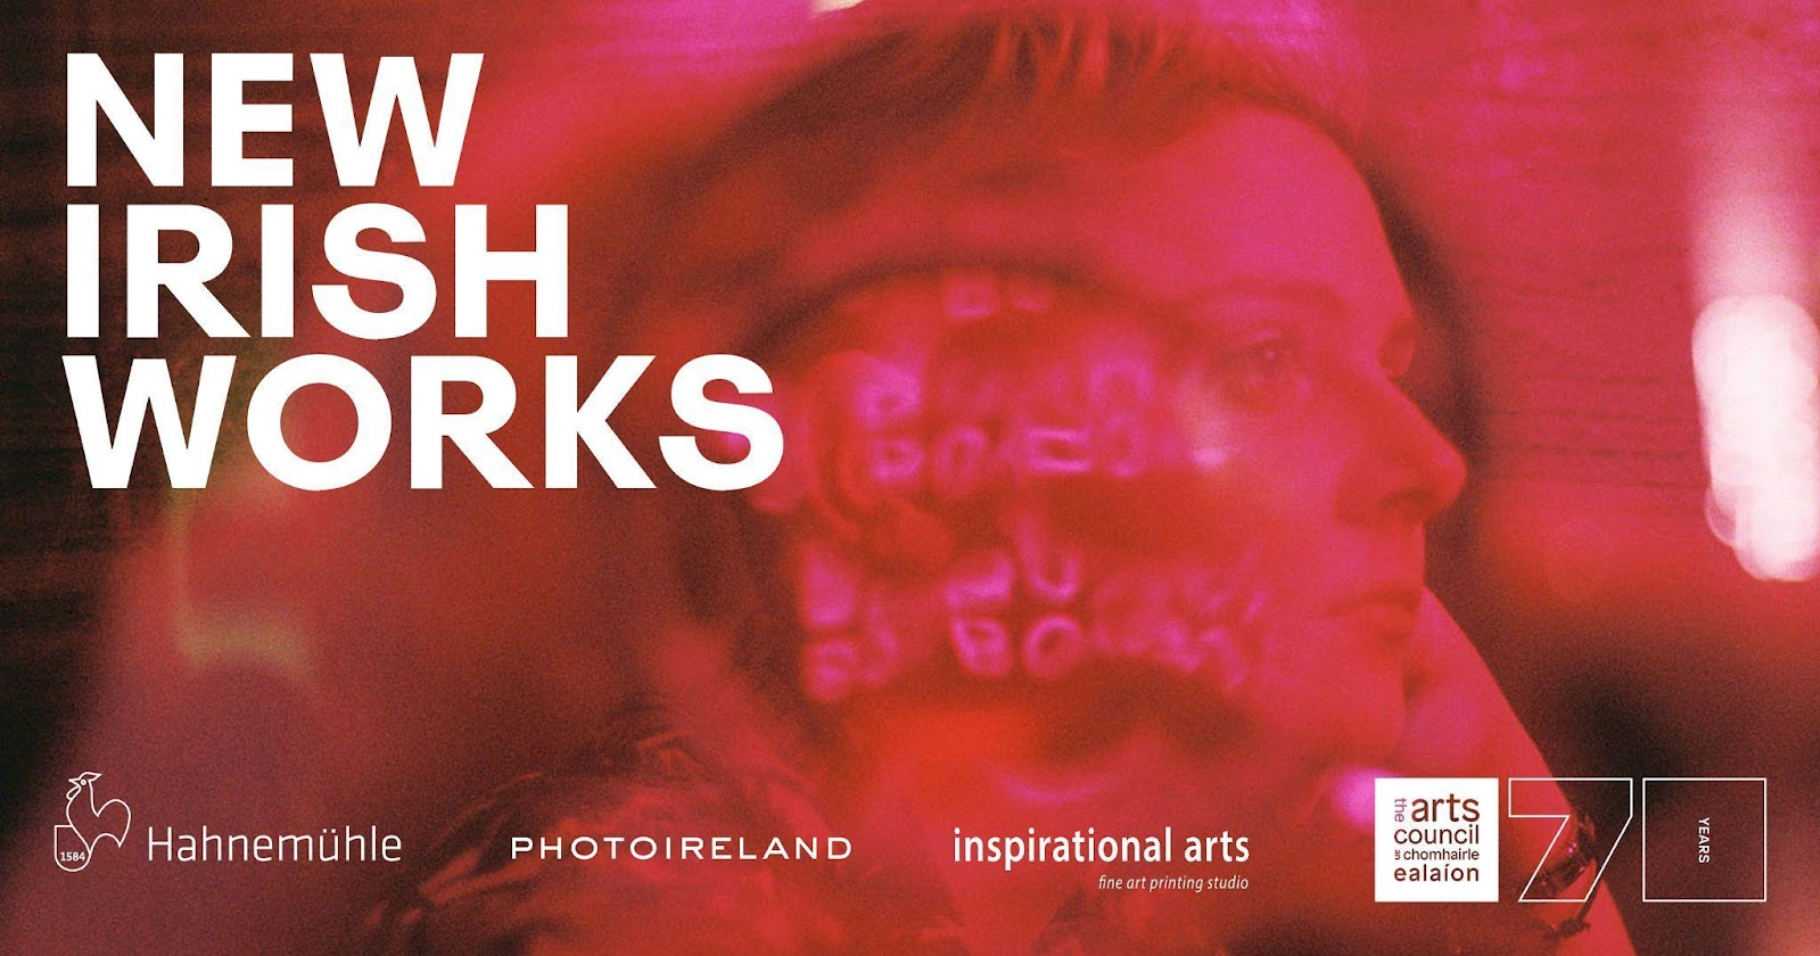 "New Irish Works" on Pink/Red Image, with sponsors listed: Hahnemühle, PhotoIreland, Inspirational Arts, and The Arts Council